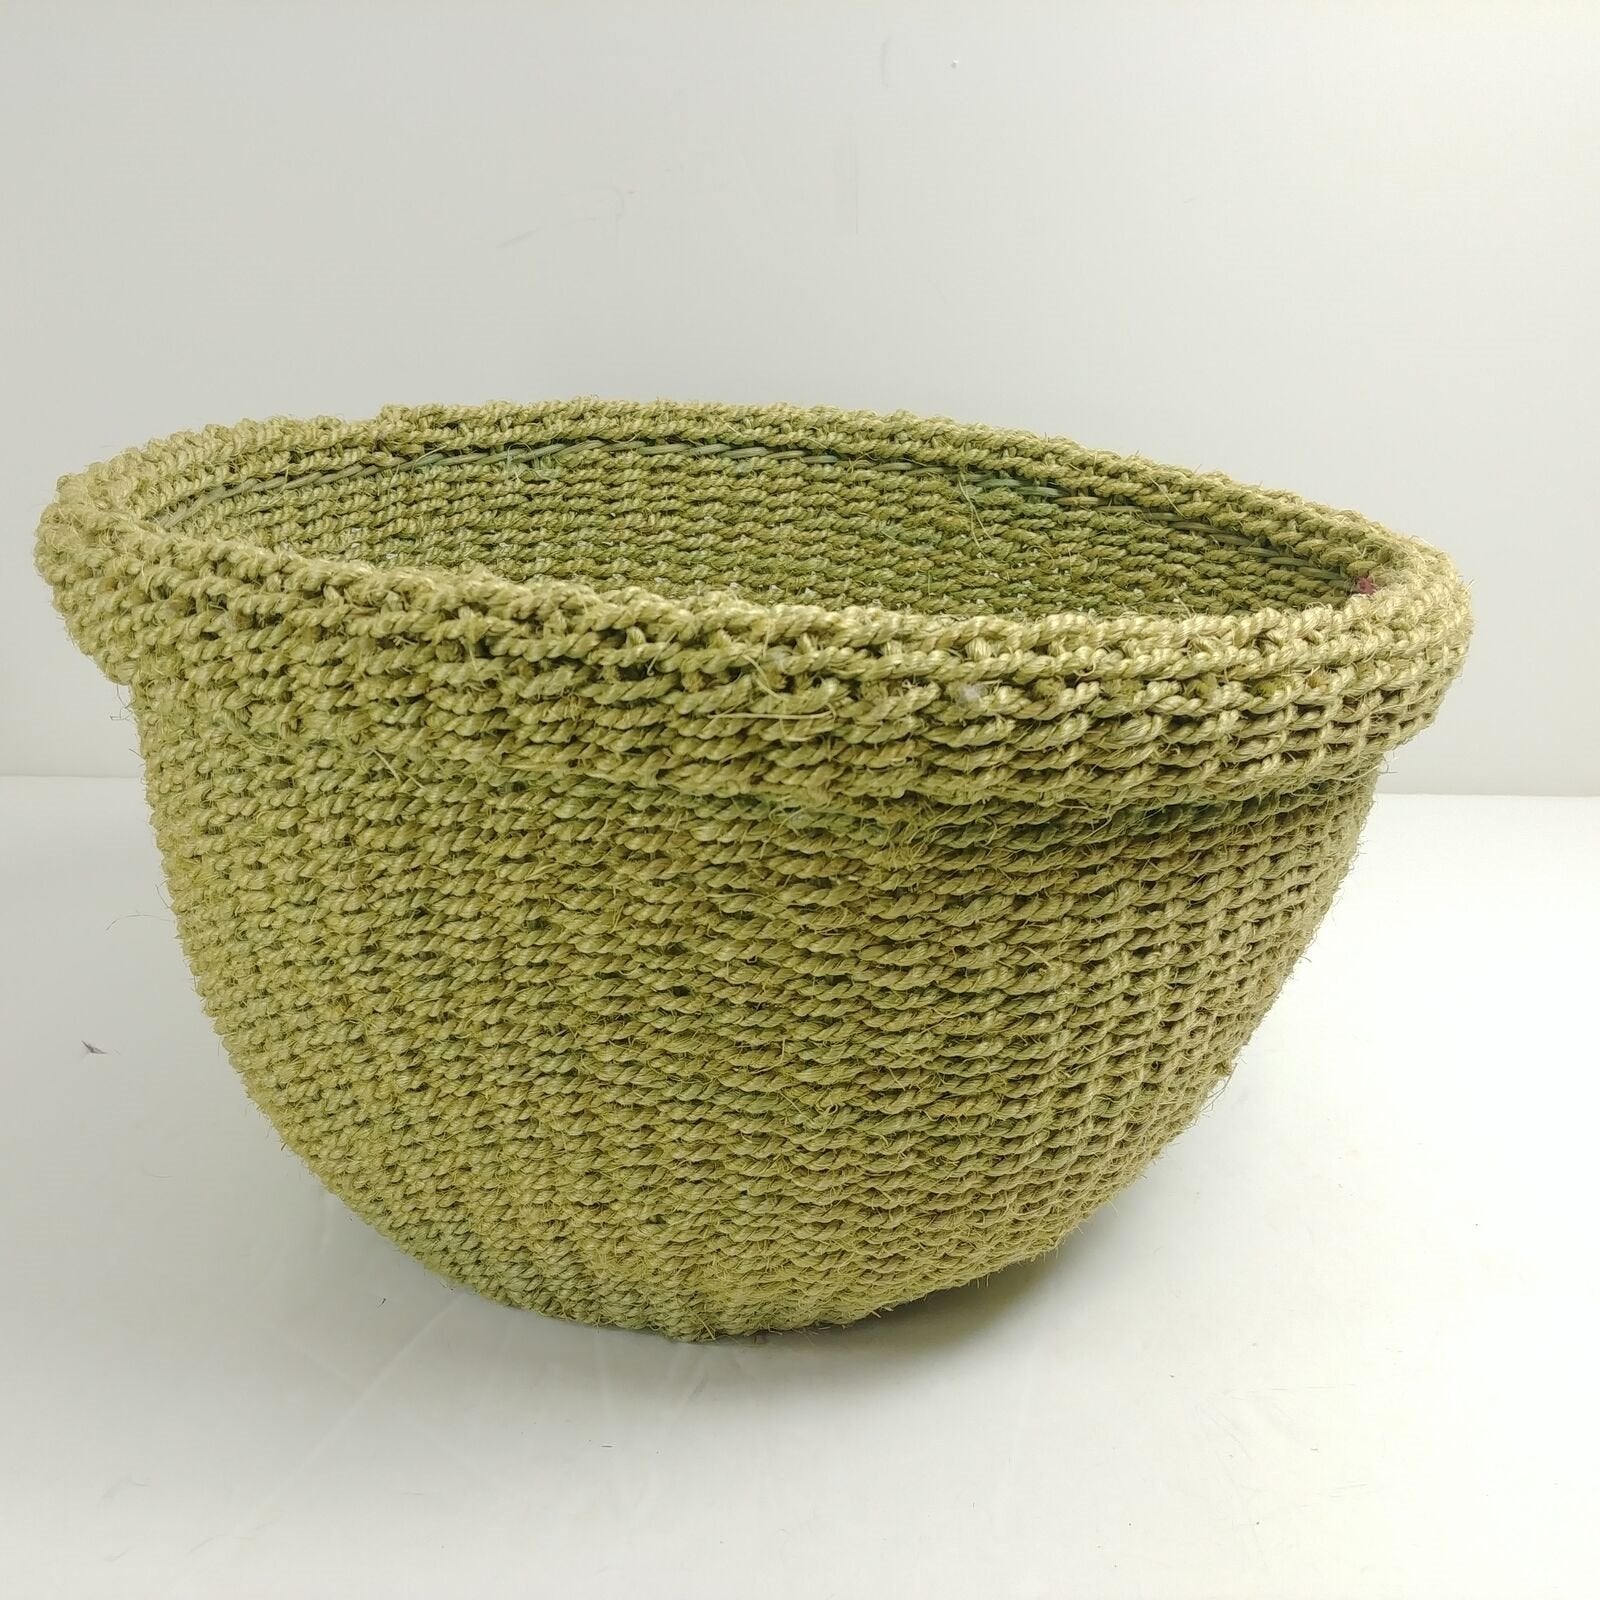 Basket Floppy Flexible Thin Rope and Reed Construction Rolled Edge